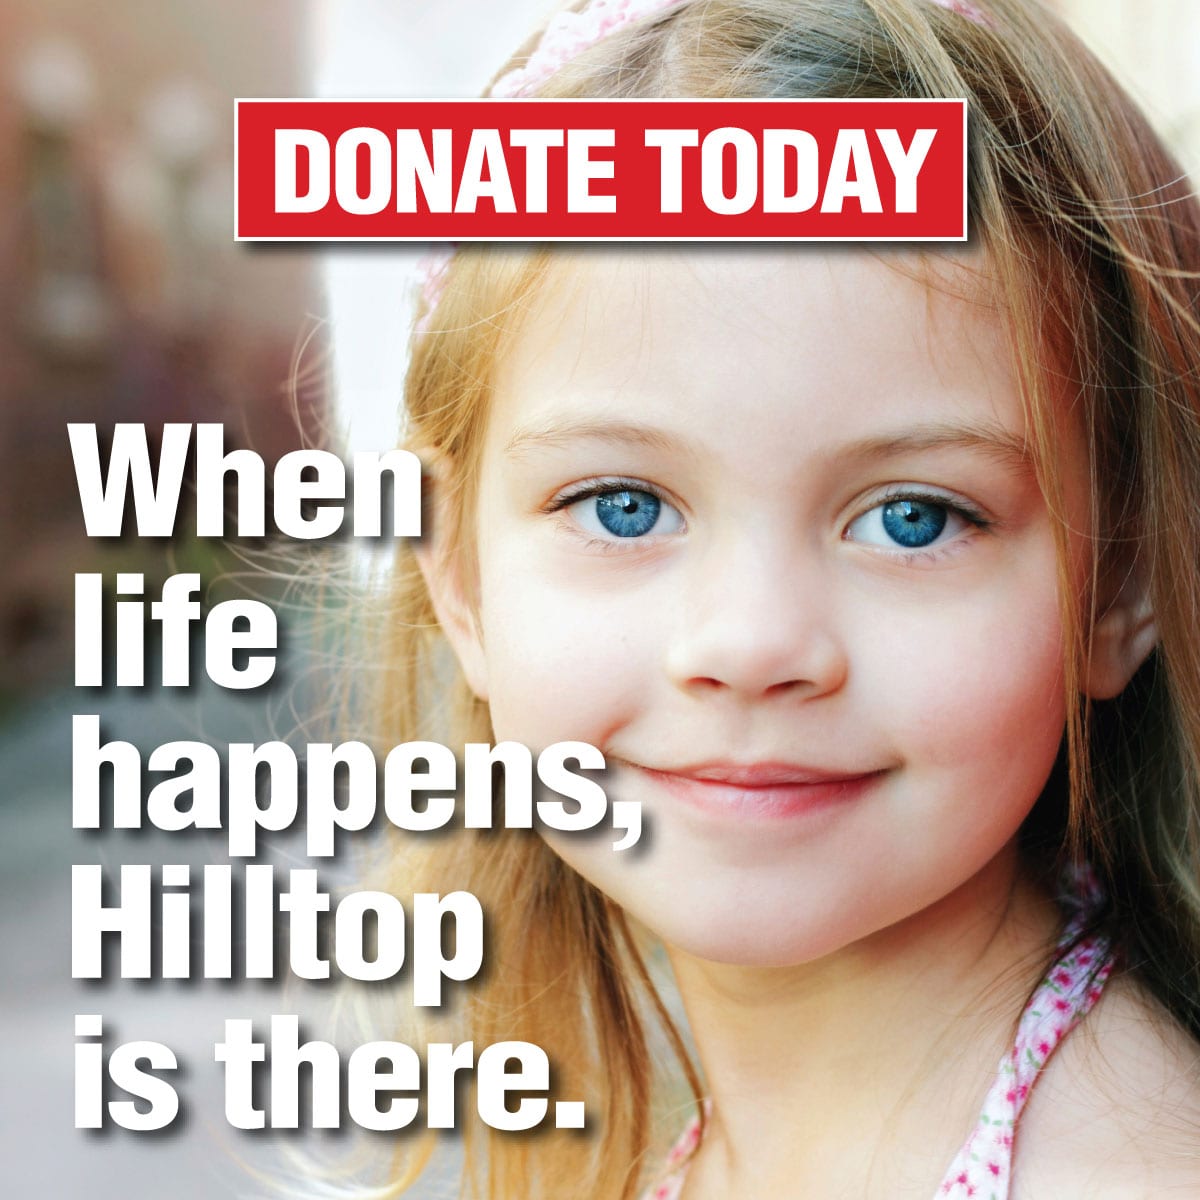 Make a Donation to Hilltop